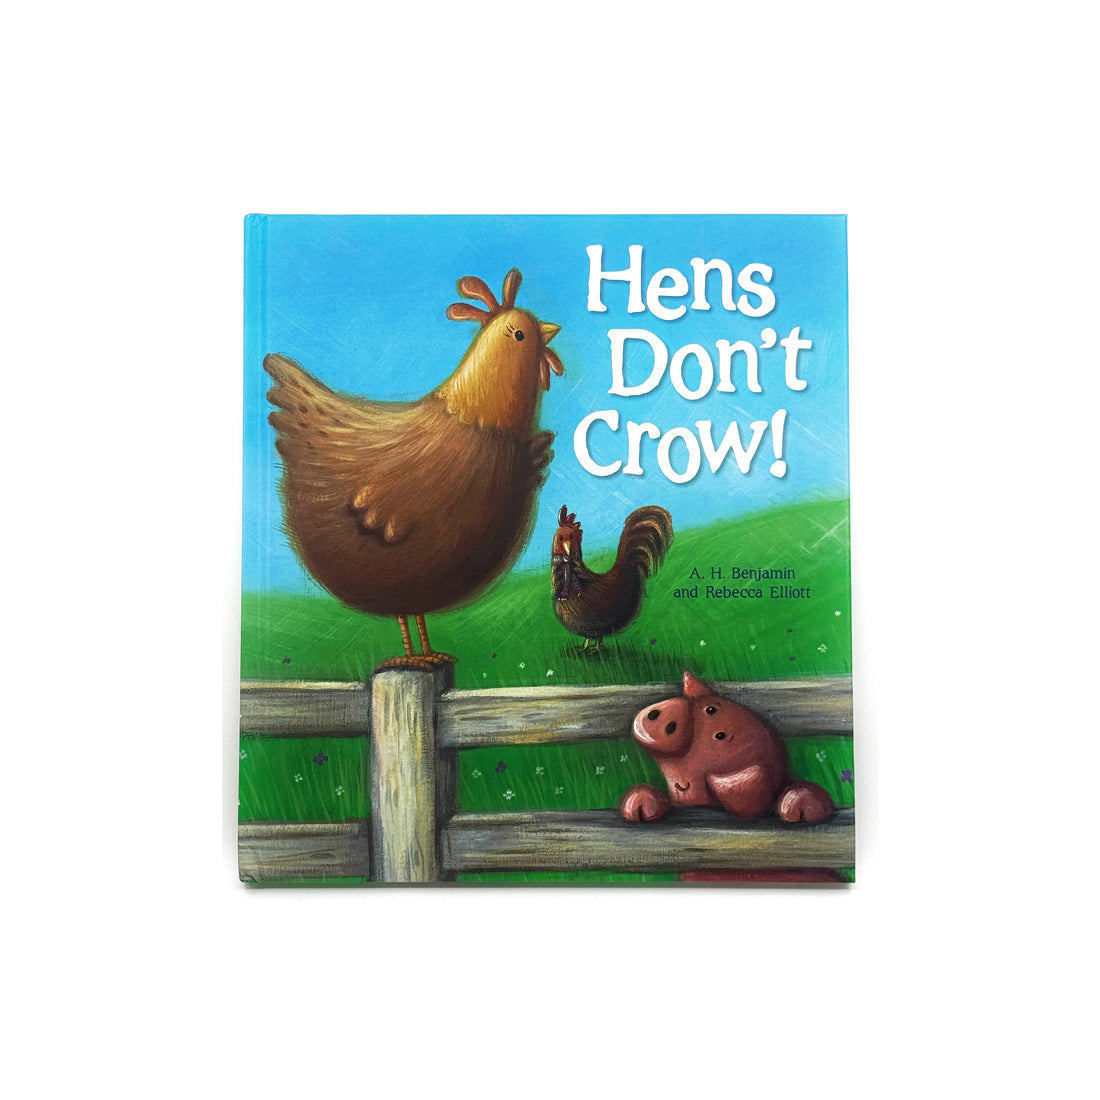 Hens Don't Crow by A.H Benjamin